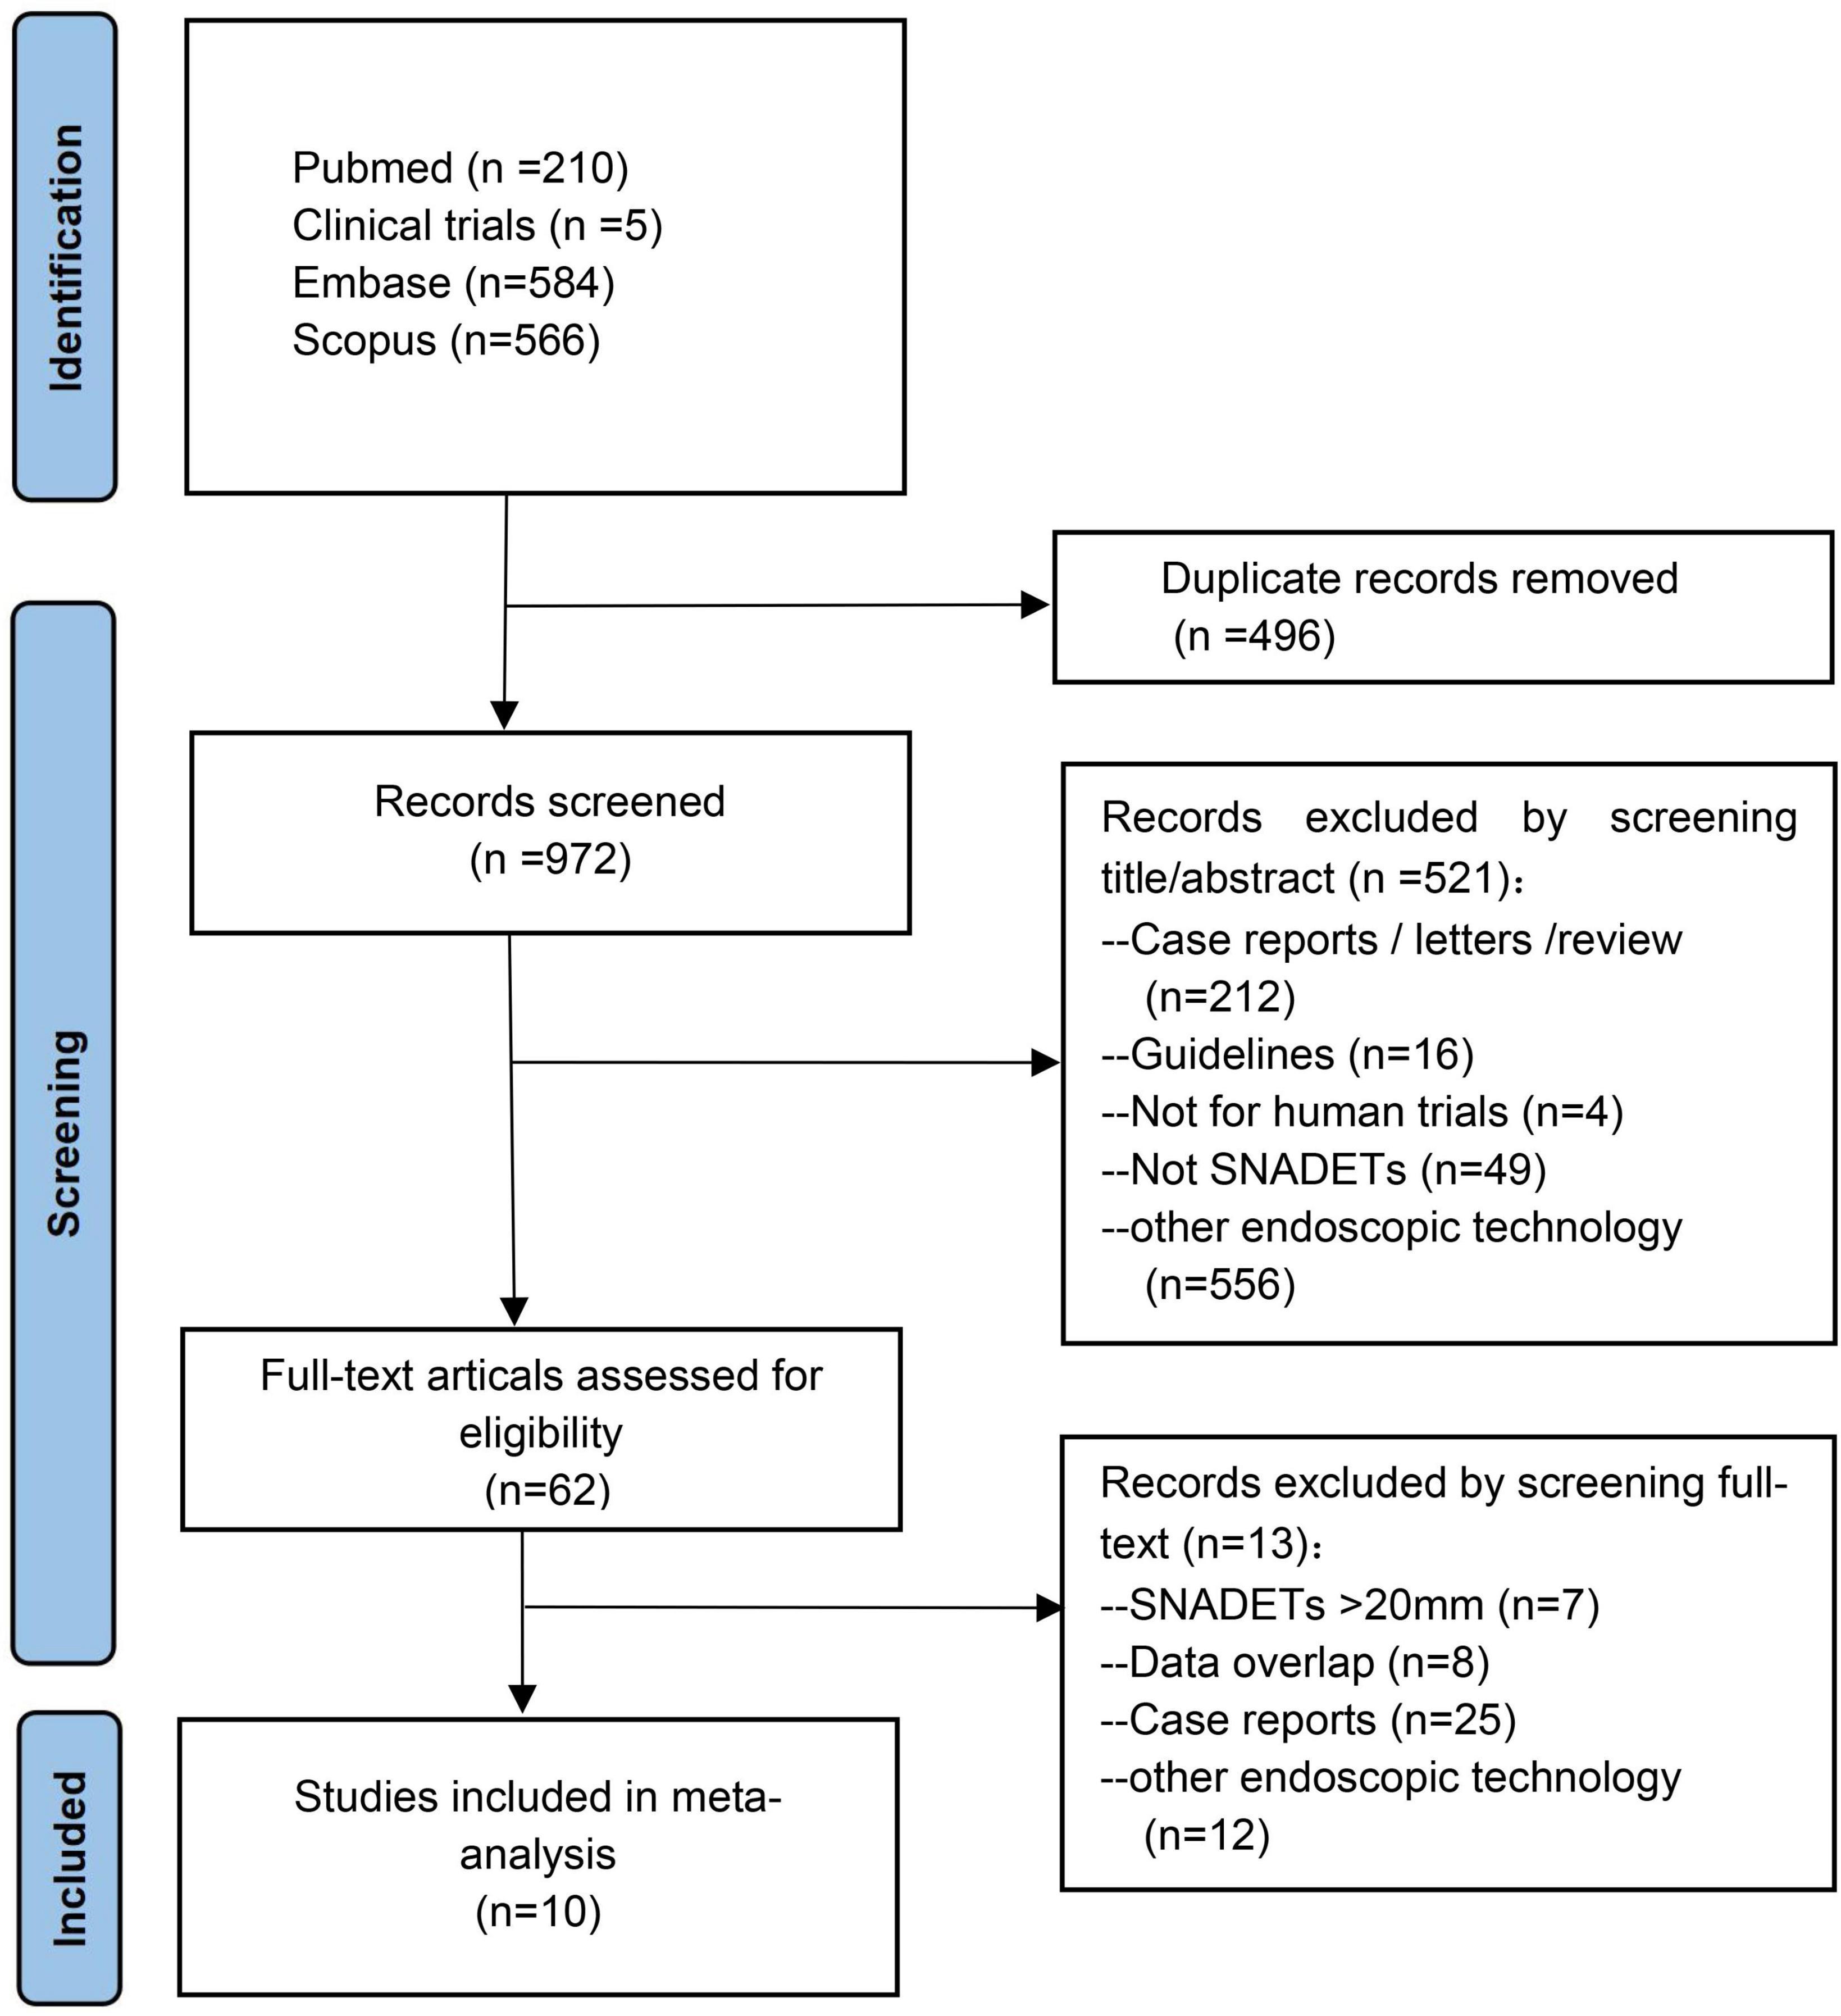 Efficacy and safety of underwater endoscopic mucosal resection for ≤20 mm superficial non-ampullary duodenal epithelial tumors: Systematic review and meta-analysis